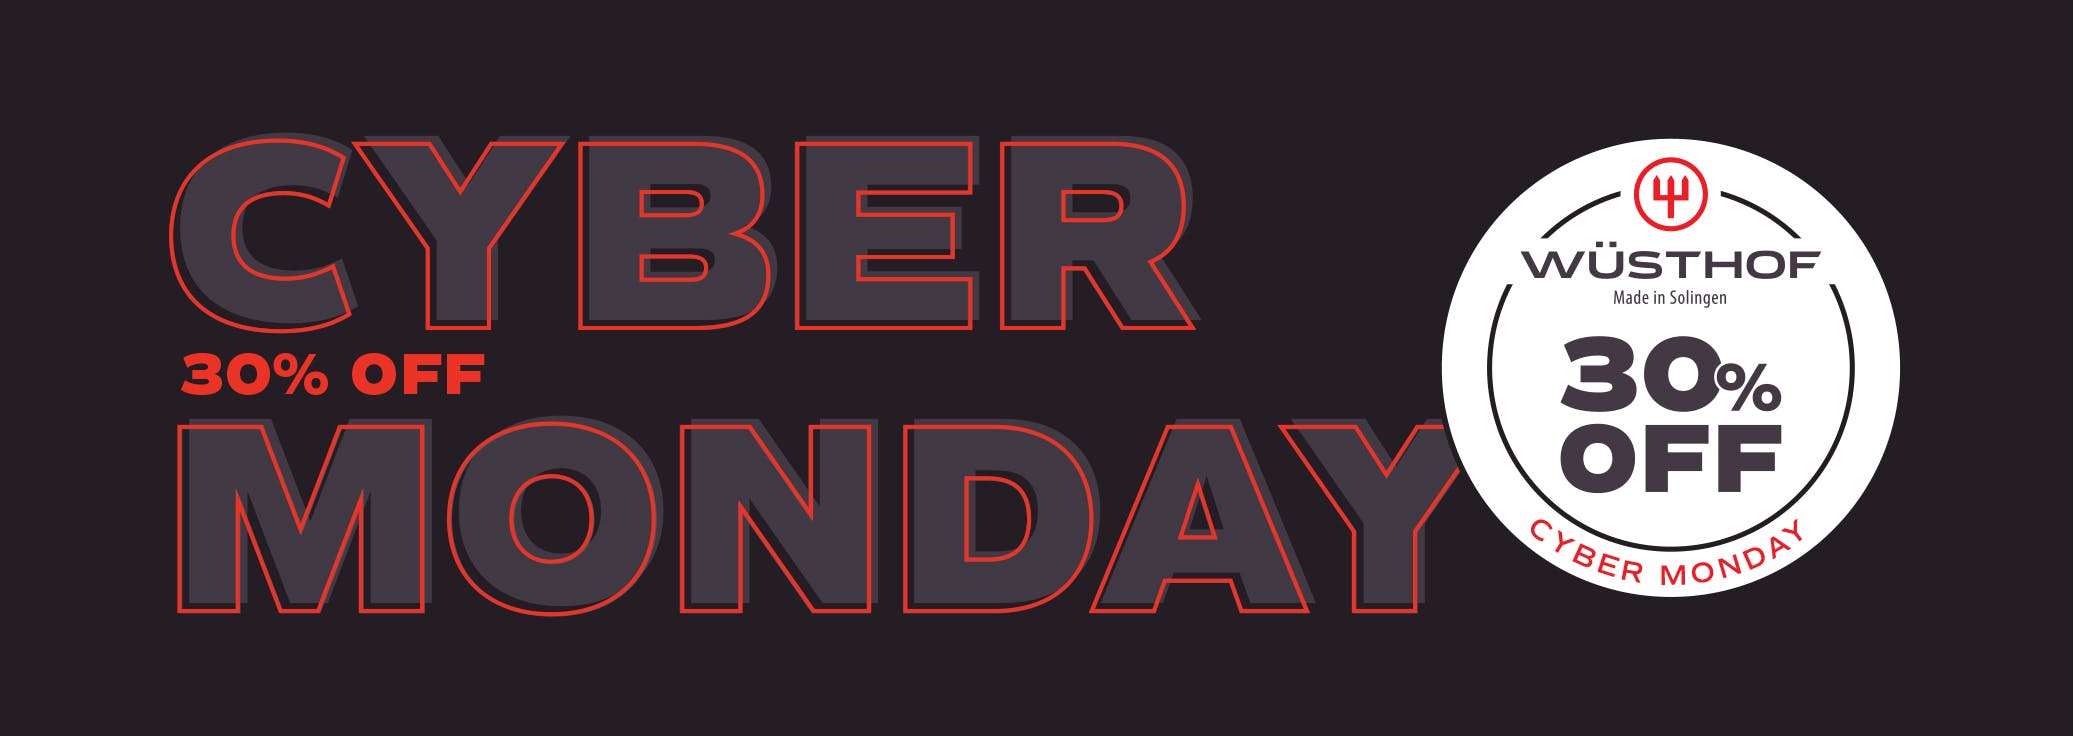 Cyber Monday 30% Off